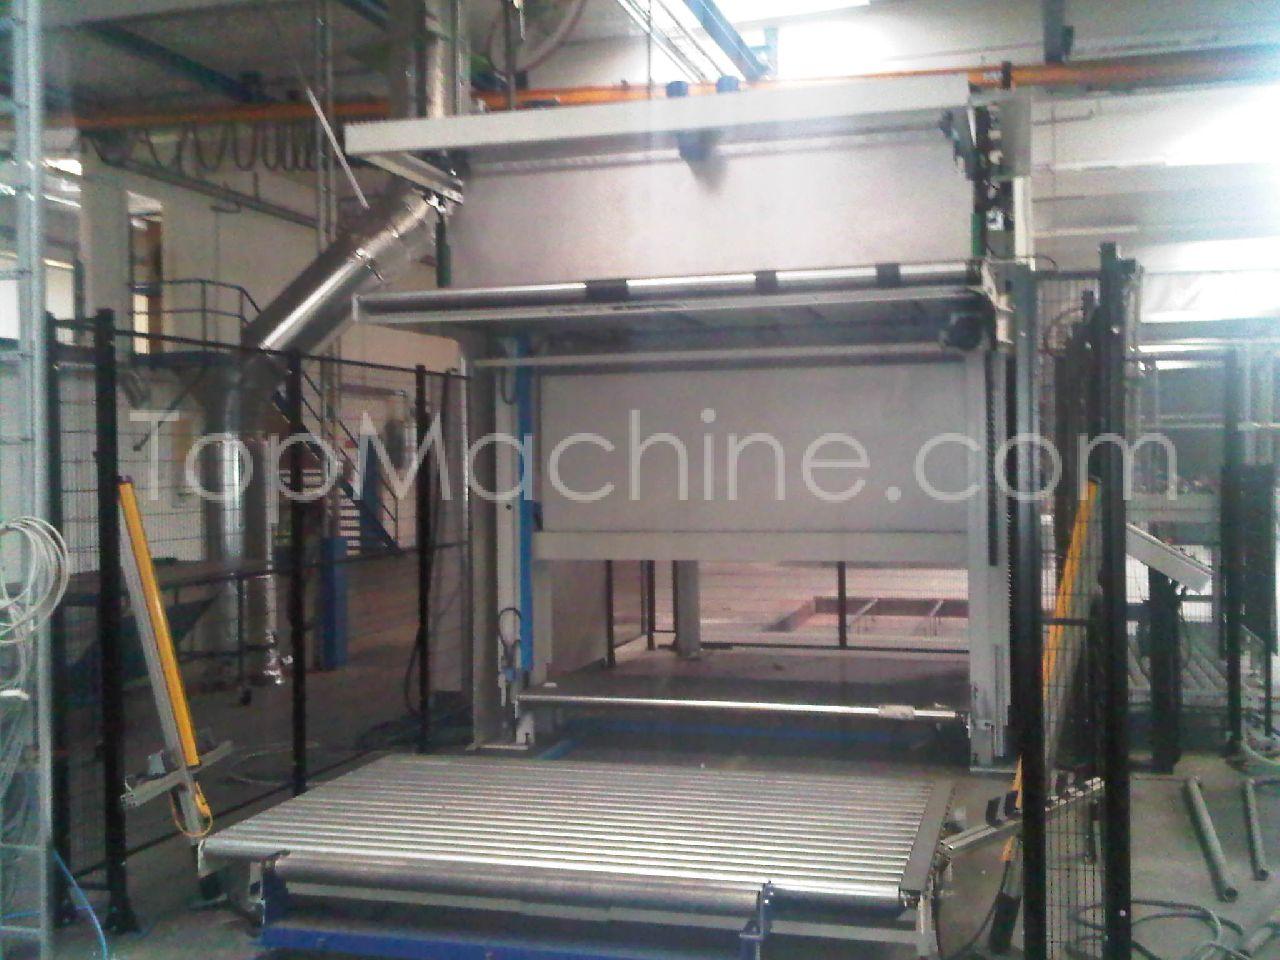 Used CELMACCH XAS 205 B Cardboard Wrapping, Palletising